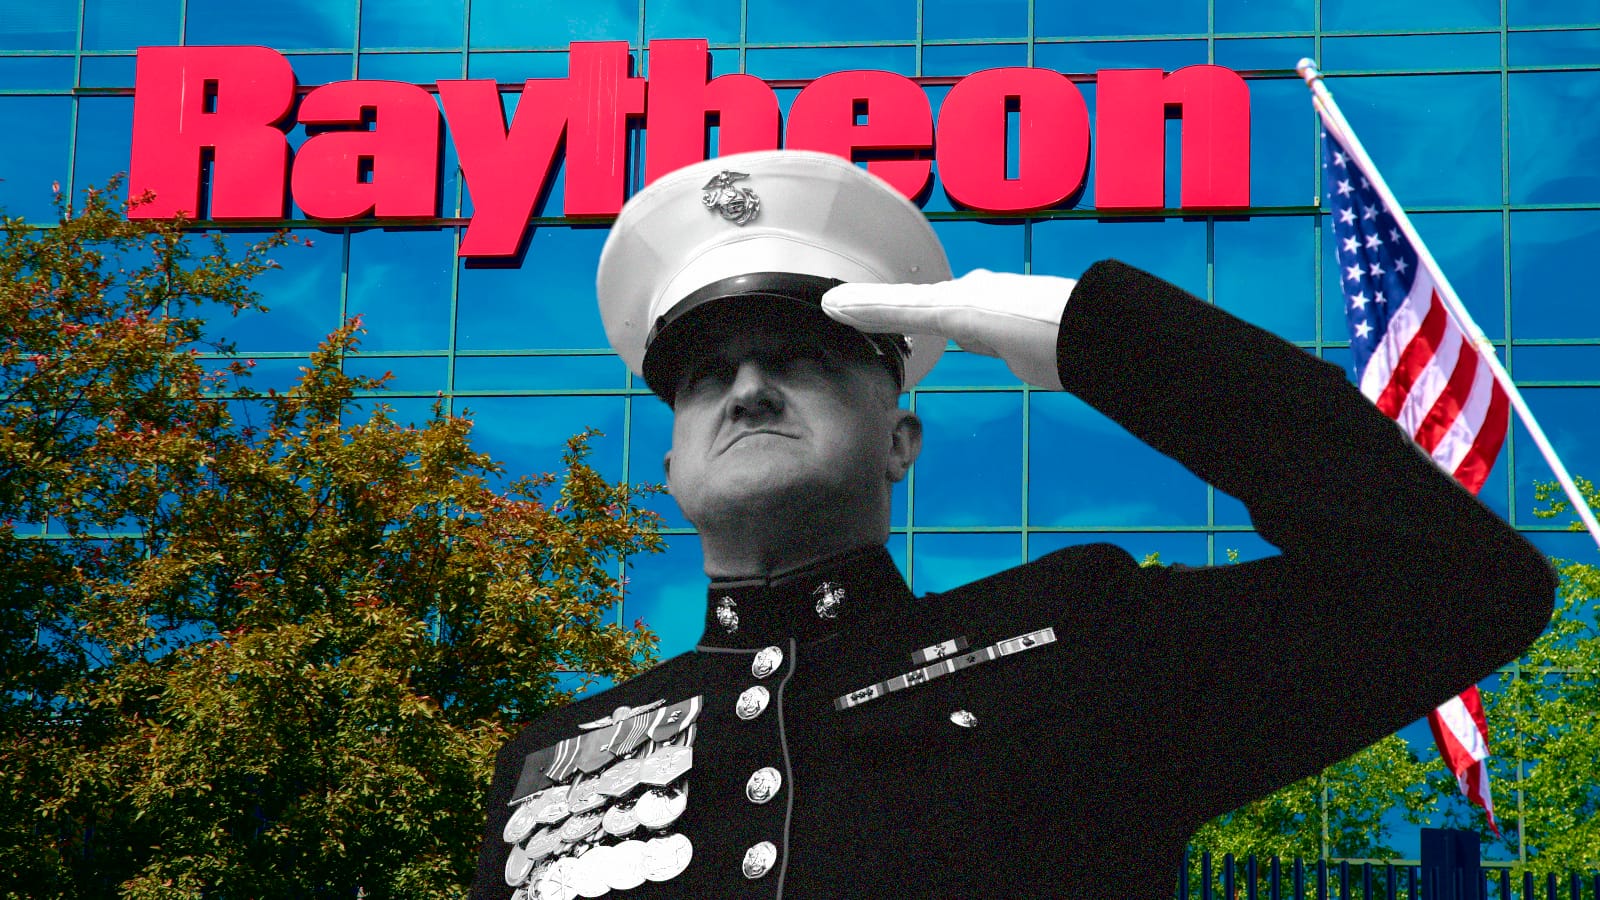 A photo of a U.S. Marine saluting is overlaid on a photo of the facade of Raytheon's Integrated Defense Systems facility.